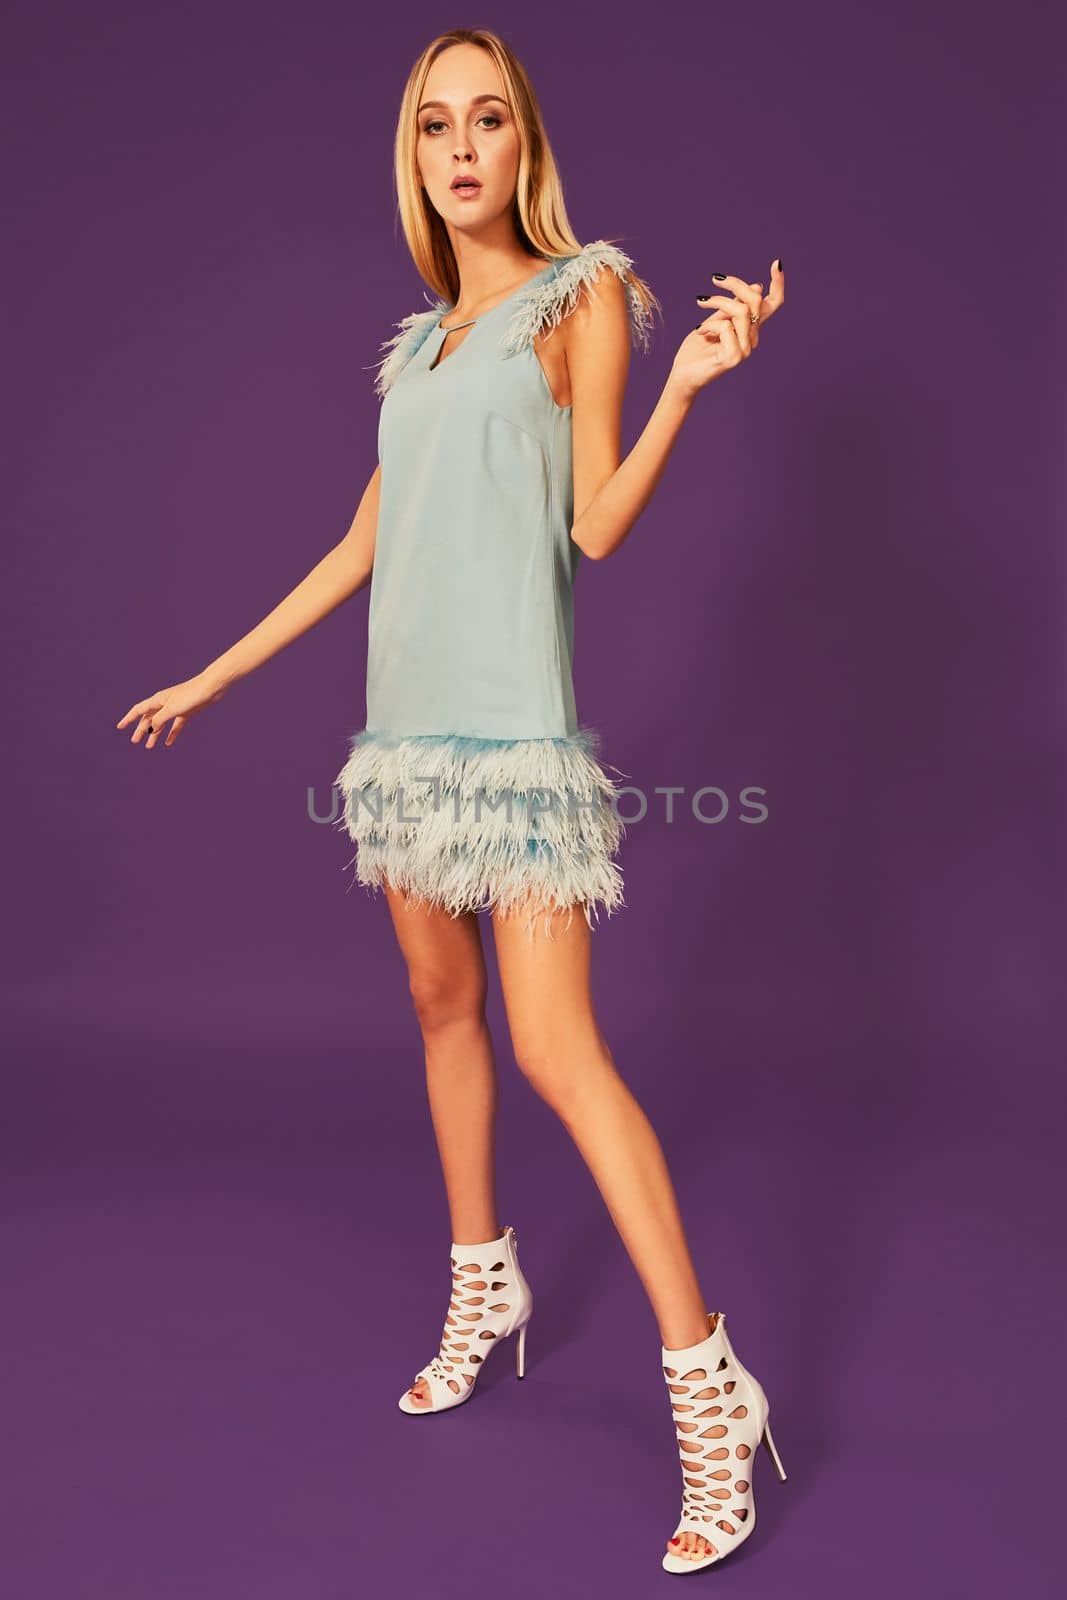 Young attractive woman with blonde long hair, dressed in elegant cocktail dress with feathers, wearing white sandals or shoes, posing at studio before camera